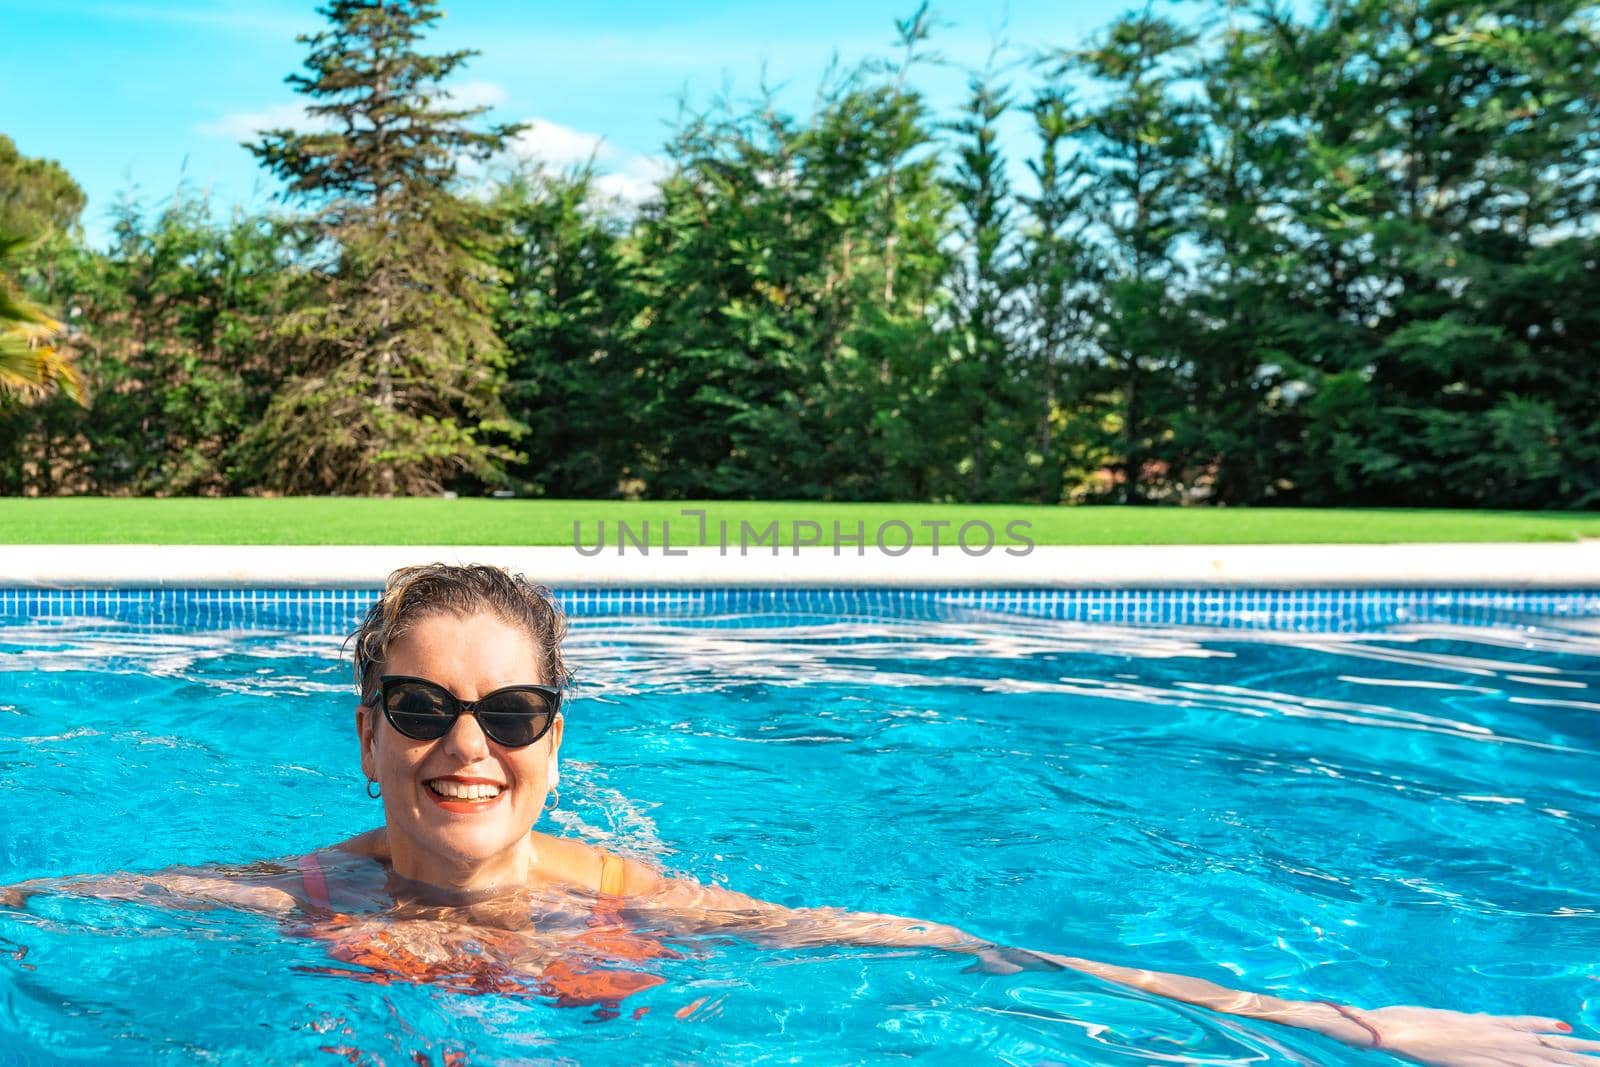 mature woman swimming happily in the pool at home on summer holidays. business woman swimming in her free time. holiday and travel concept. outdoor garden, natural sunlight.